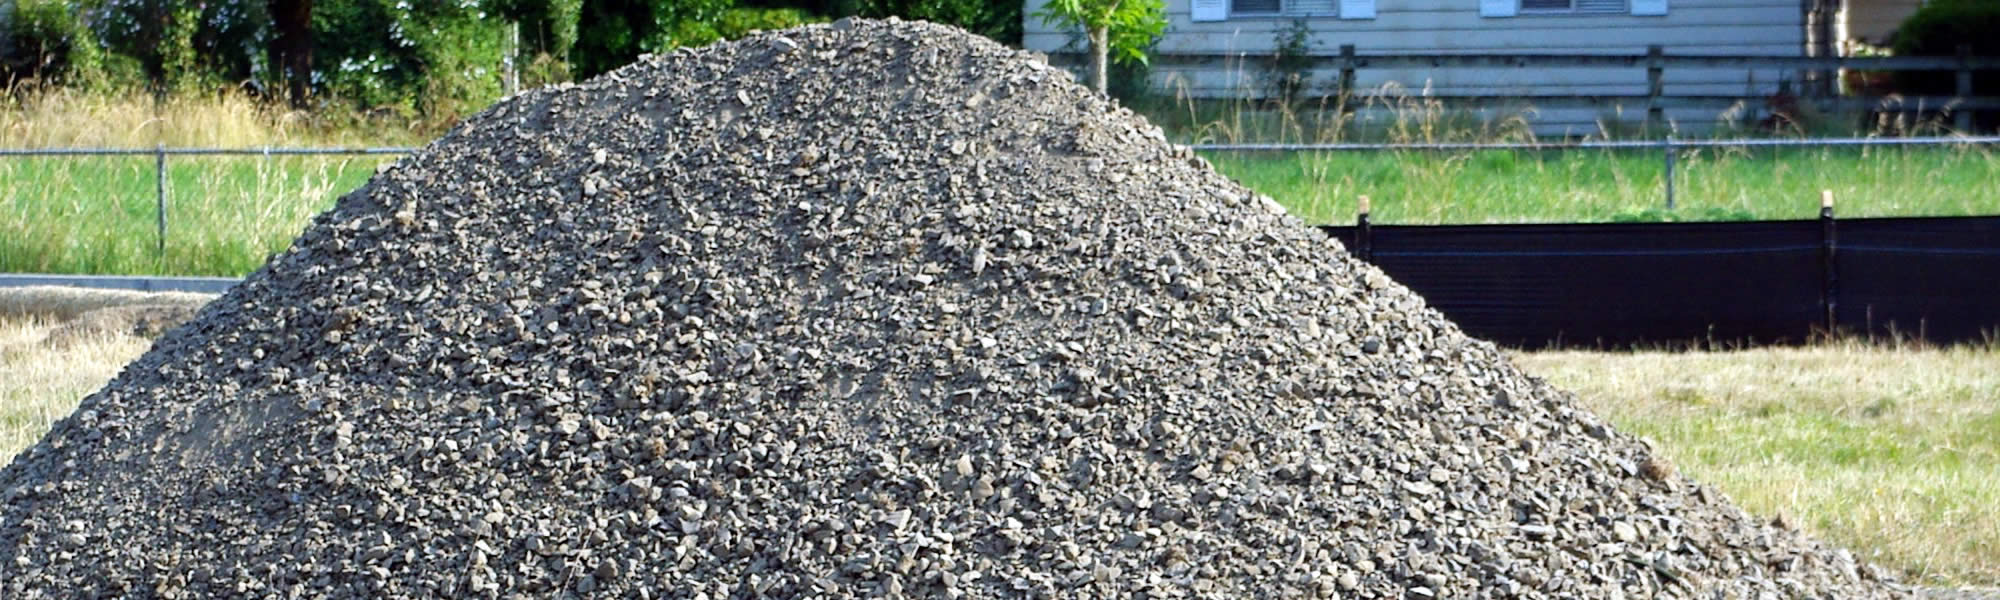 Ashwaubenon Gravel and Dirt Delivery Services near me